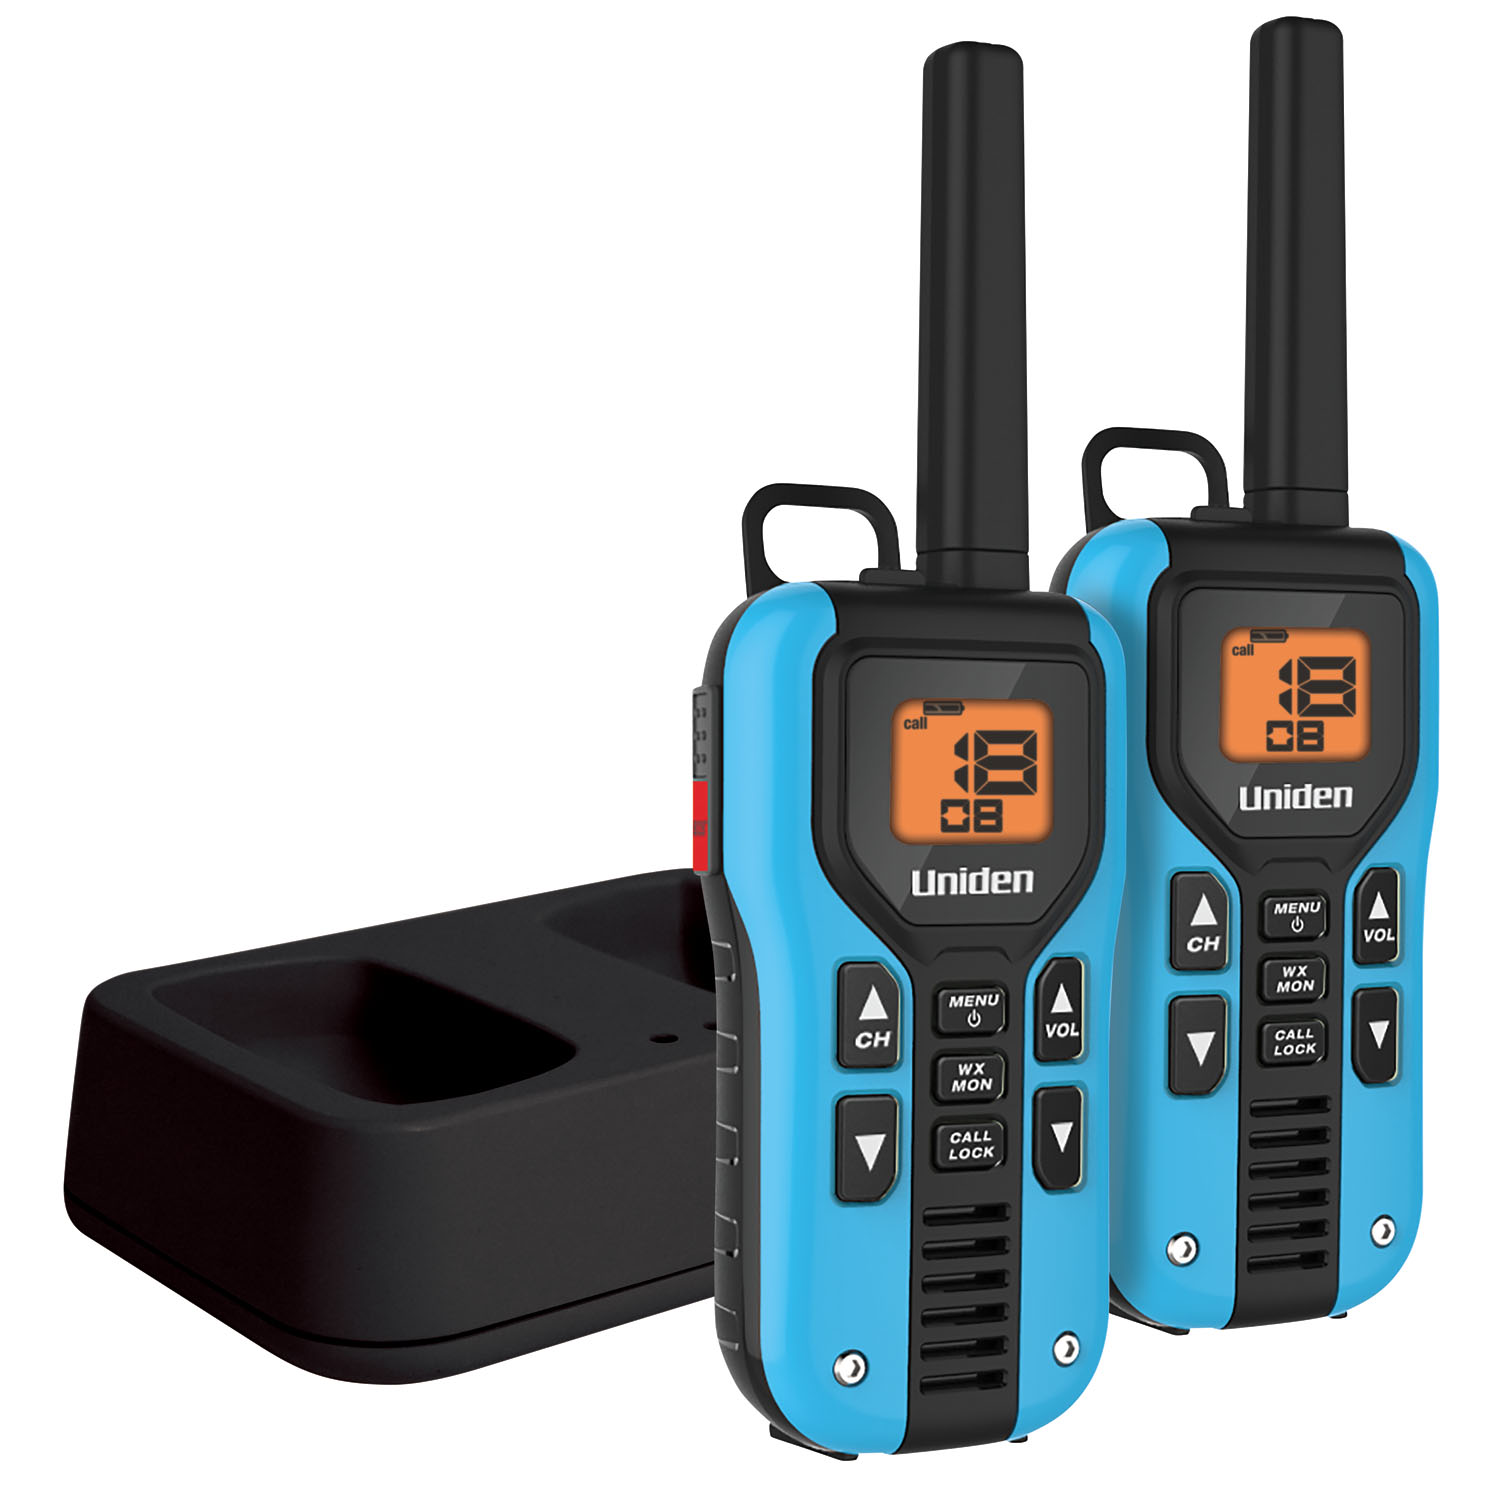 Uniden - 22 Ch. 40 Mile Gmrs/Frs Radio Pair With Jis4 Water Resistant Housing, 121 Privacy Channels, Noaa Weather & Emergency St